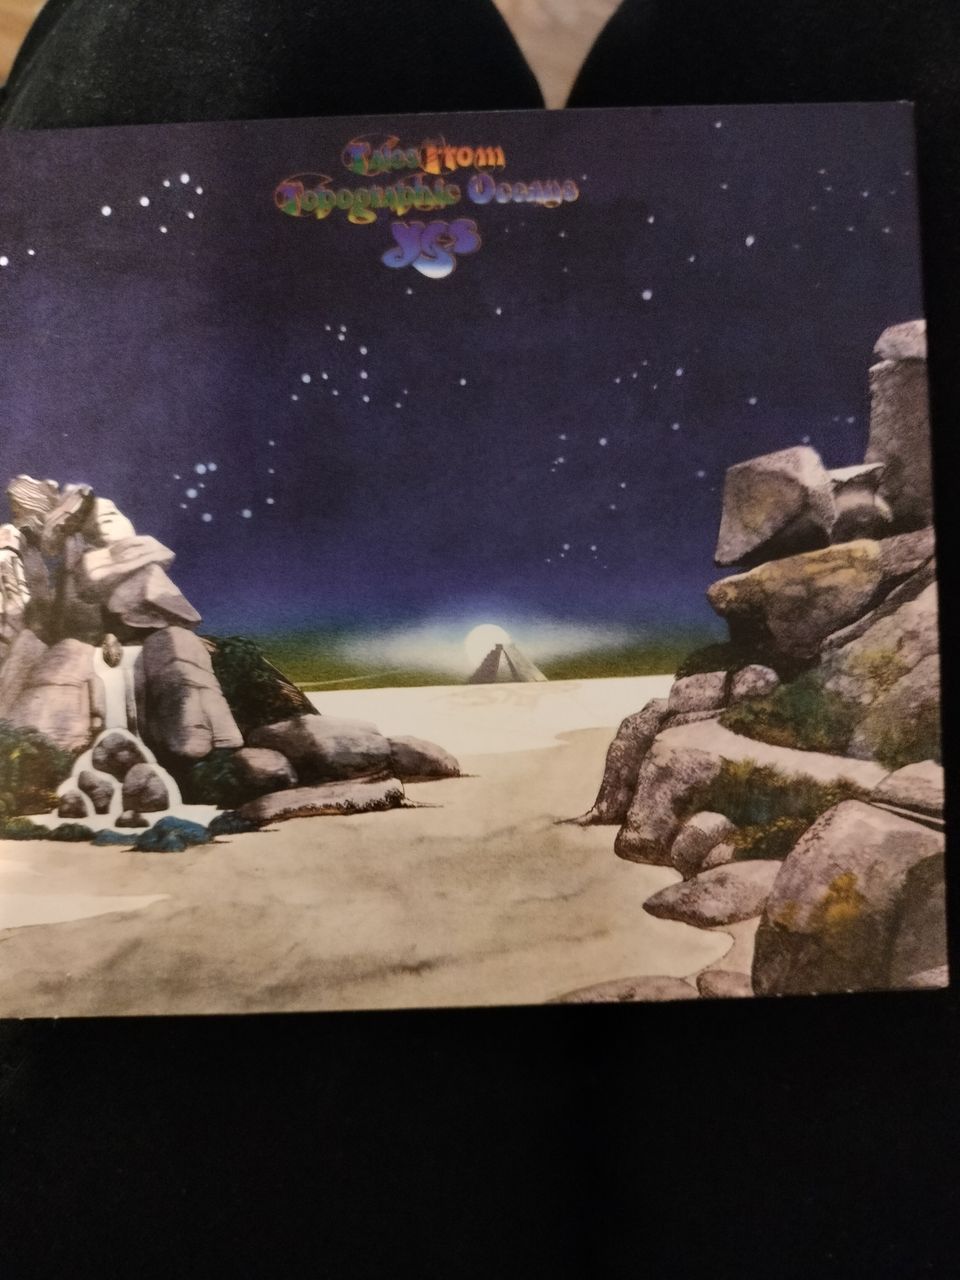 Tales from topographic oceans-yes